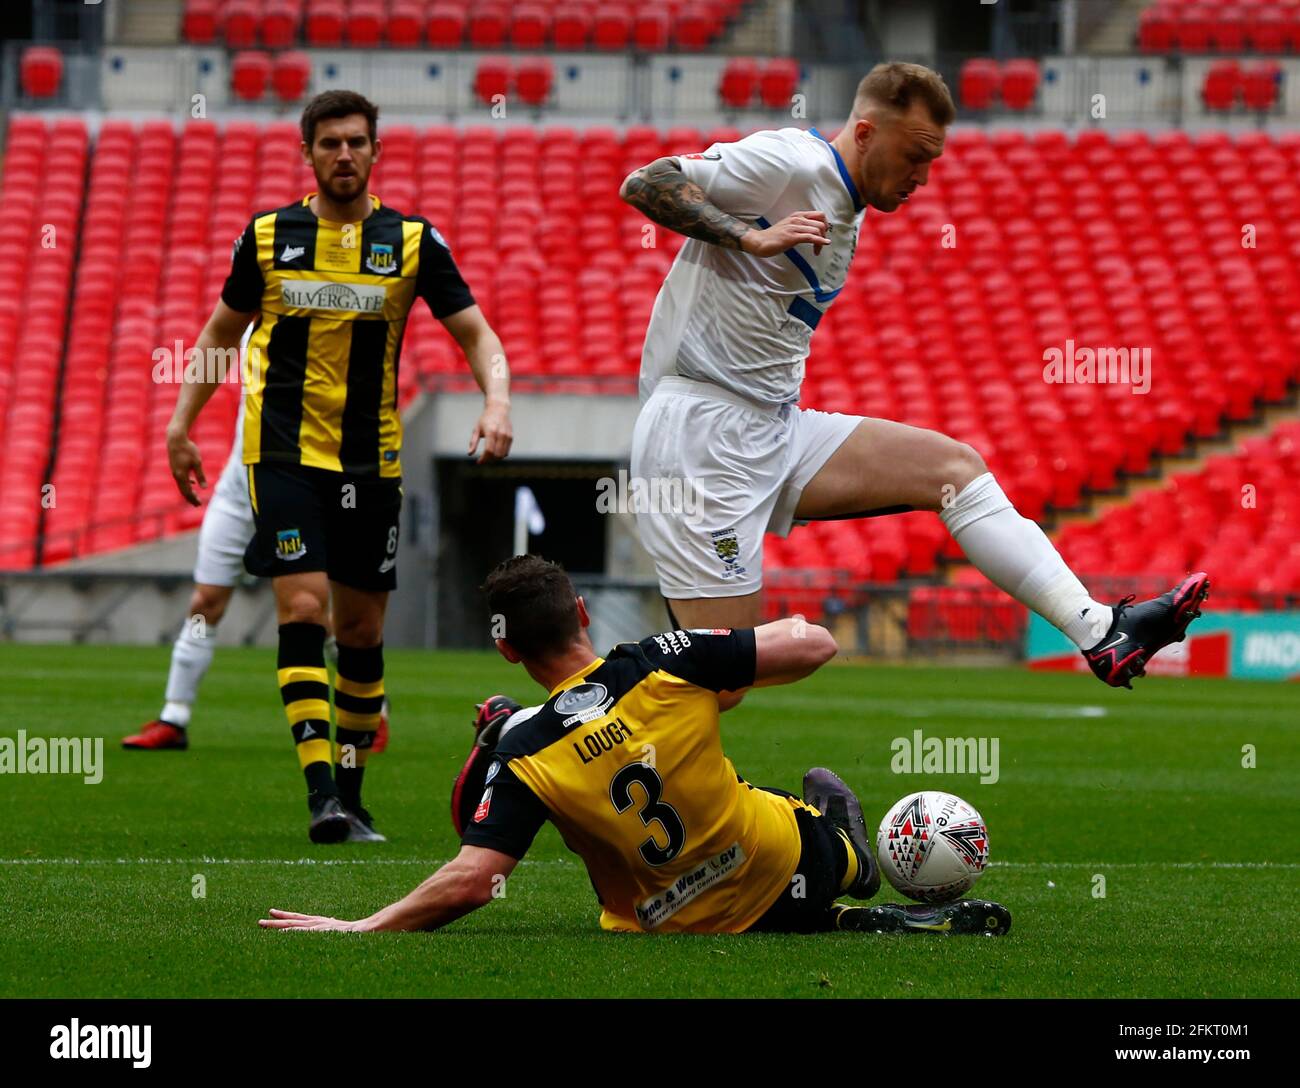 London, UK. 03rd May, 2021. LONDON ENGLAND - MAY 03: Dale Pearson of Consett AFC during The 2019/2020 Buildbase FA Vase Final between Consett and Hebburn at Wembley Stadium on 03rd May, 2021 in London, England Credit: Action Foto Sport/Alamy Live News Stock Photo